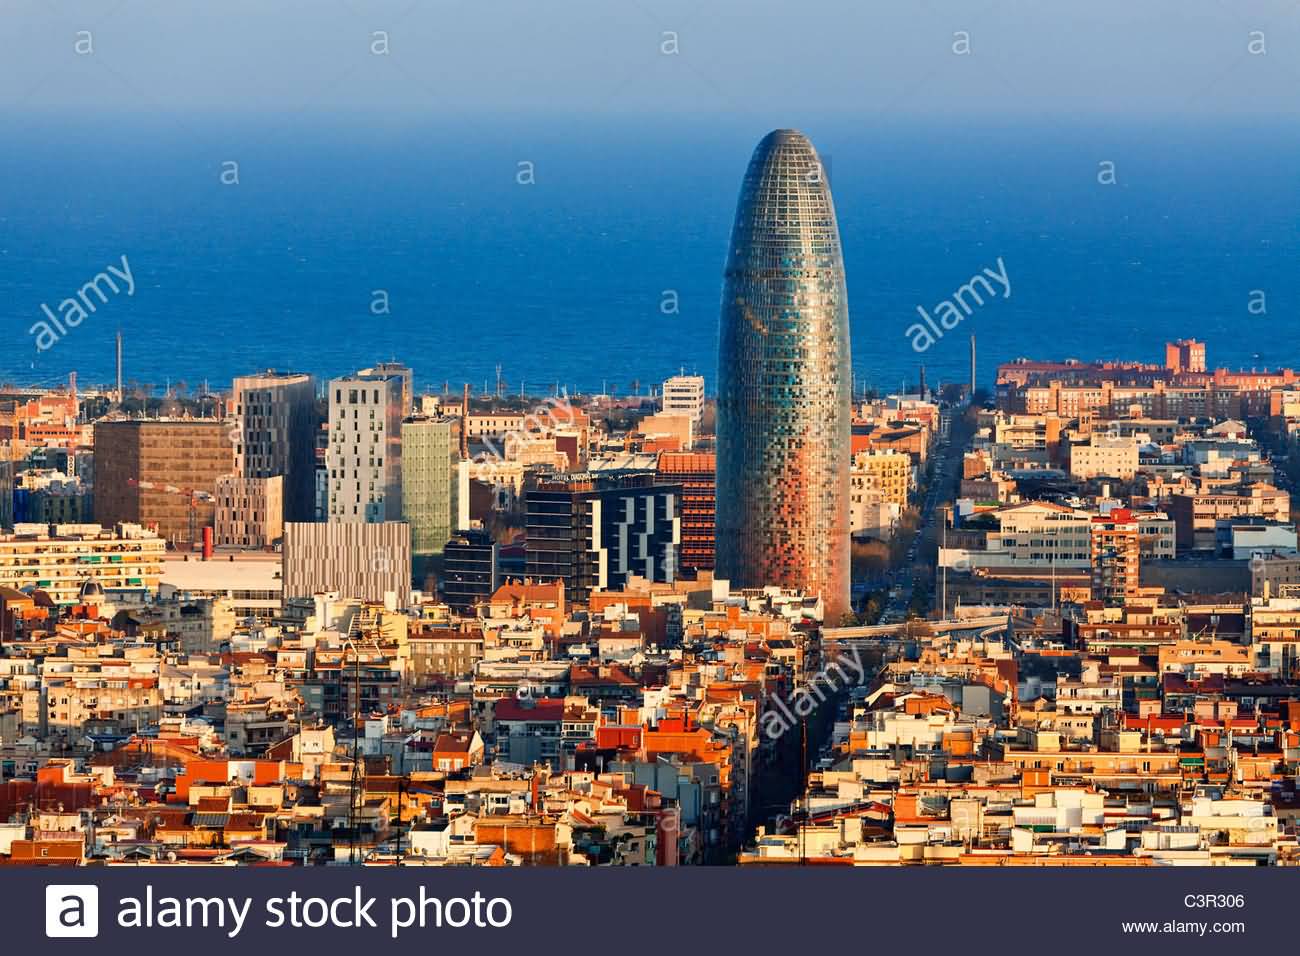 View Of The Torre Agbar And Skyline Of Barcelona, Spain